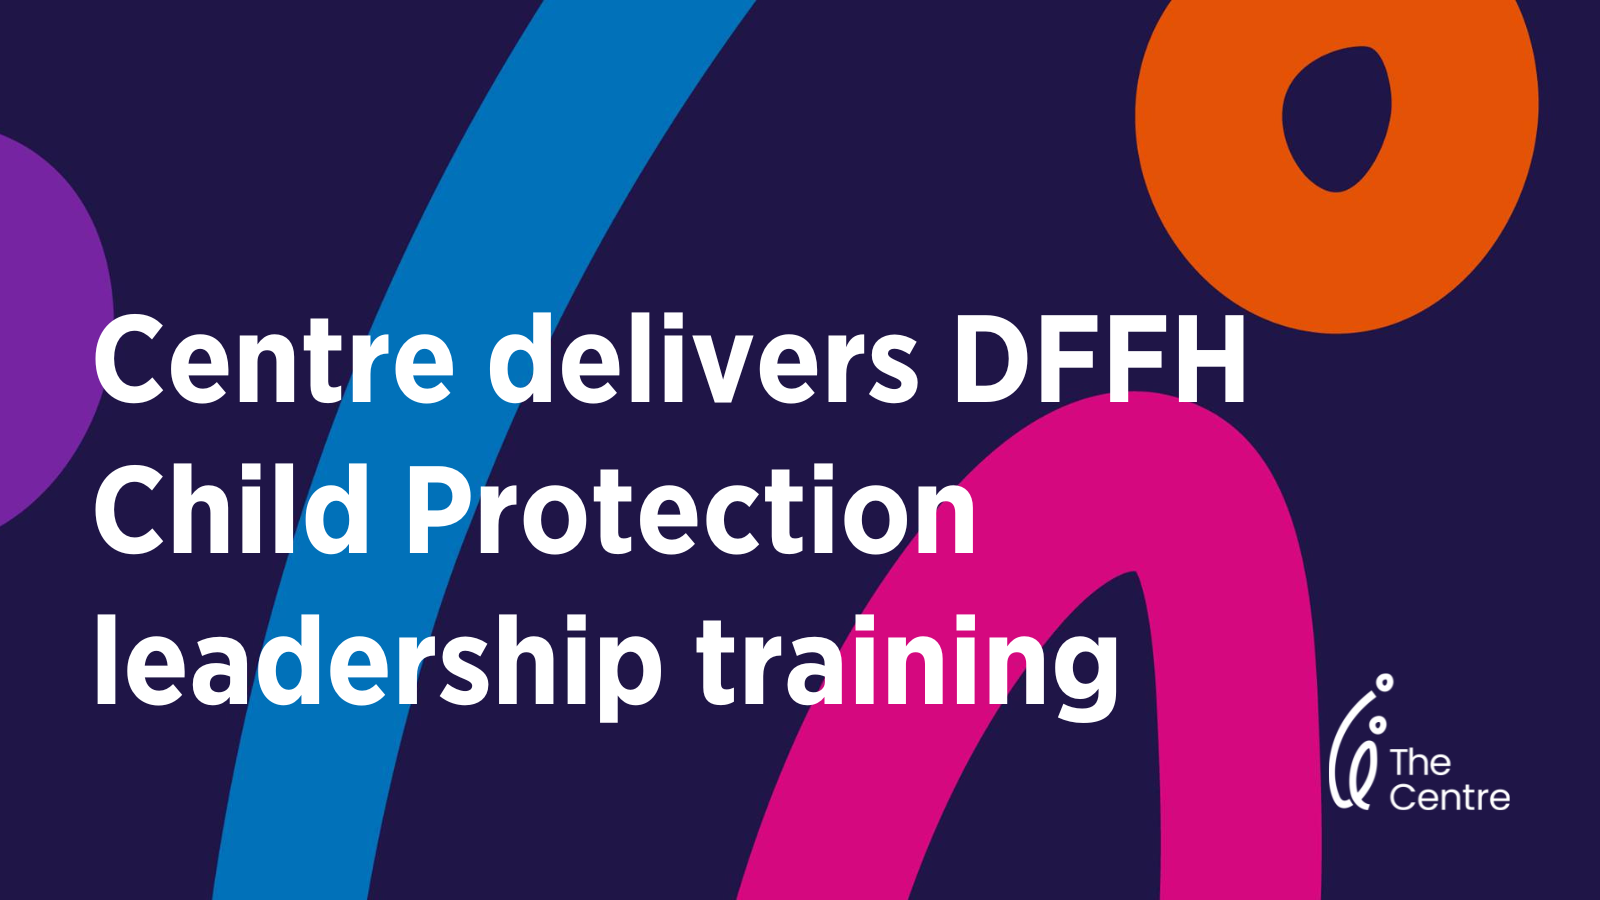 Centre to deliver DFFH Child Protection leadership training